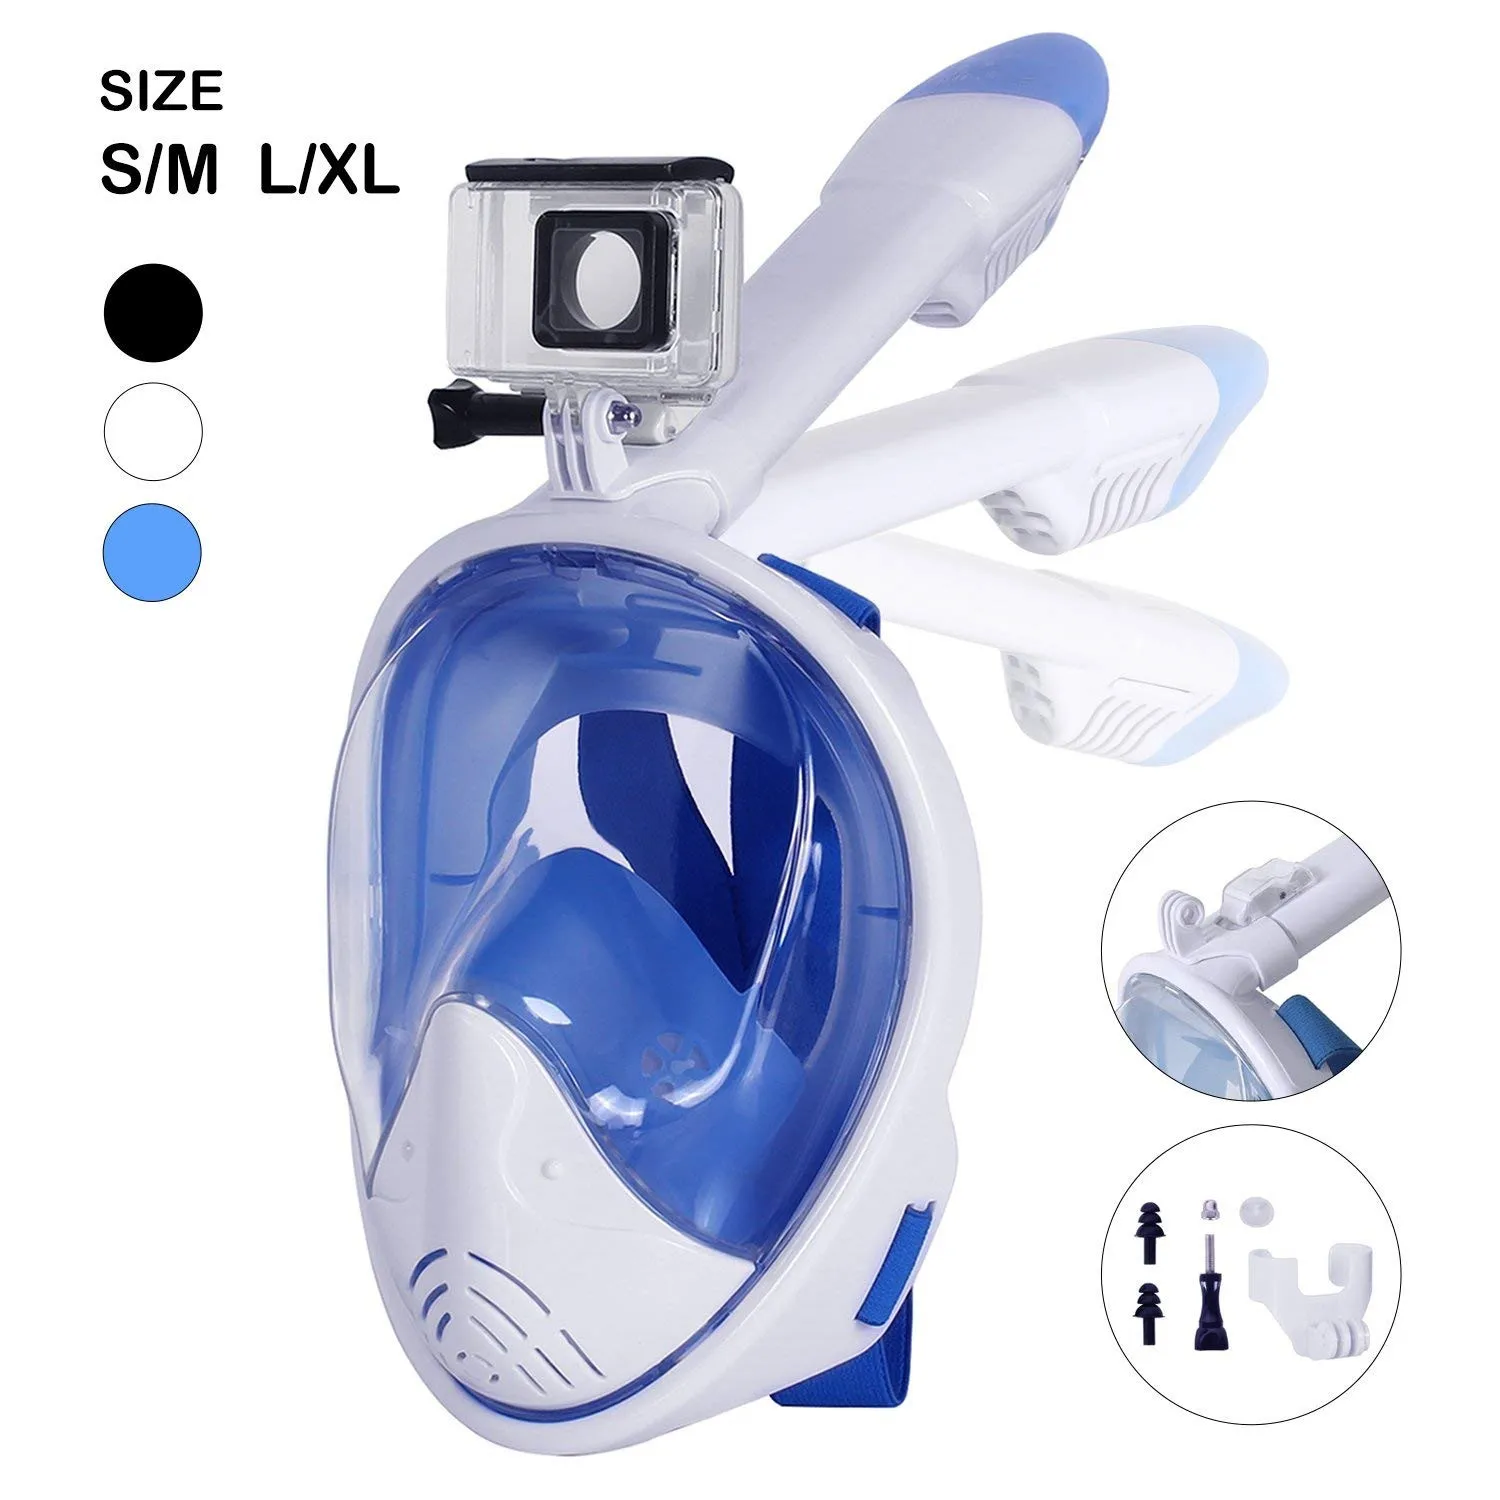 

2019 Amazon Top Seller Easybreath 180 full face Snorkel Mask anti fog diving mask with two snorkel